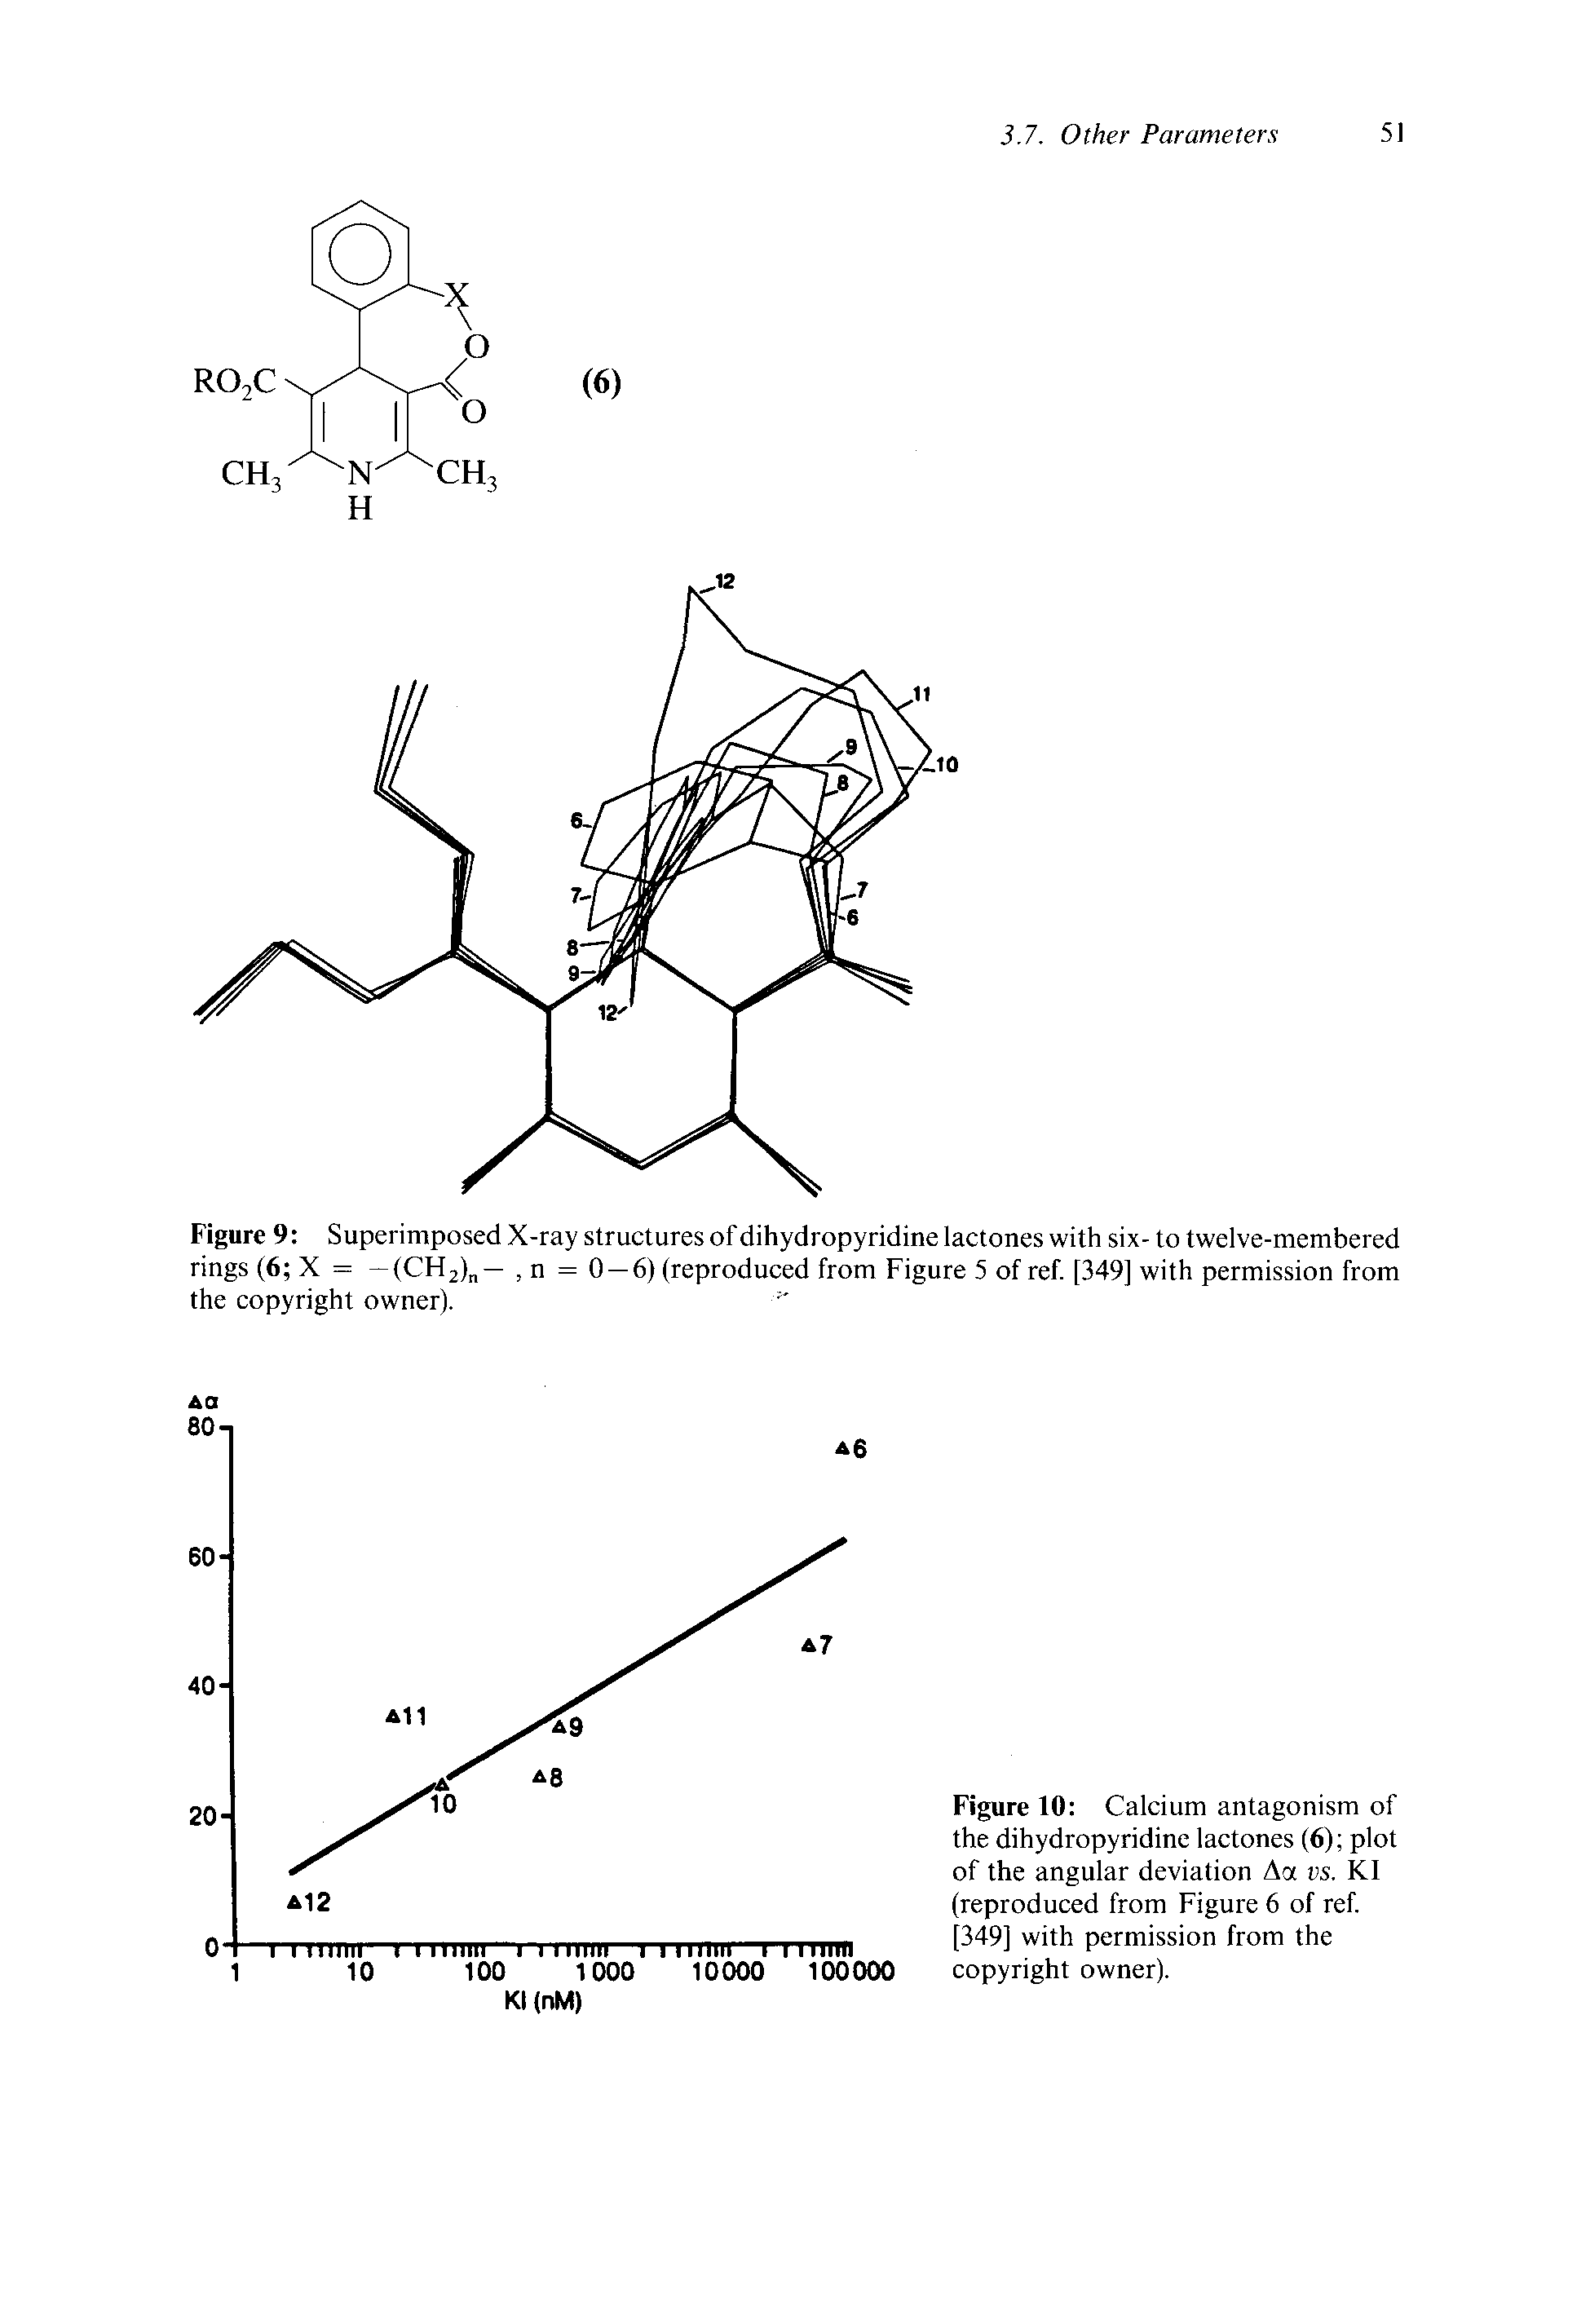 Figure 10 Calcium antagonism of the dihydropyridine lactones (6) plot of the angular deviation Aa vs. KI (reproduced from Figure 6 of ref [349] with permission from the copyright owner).